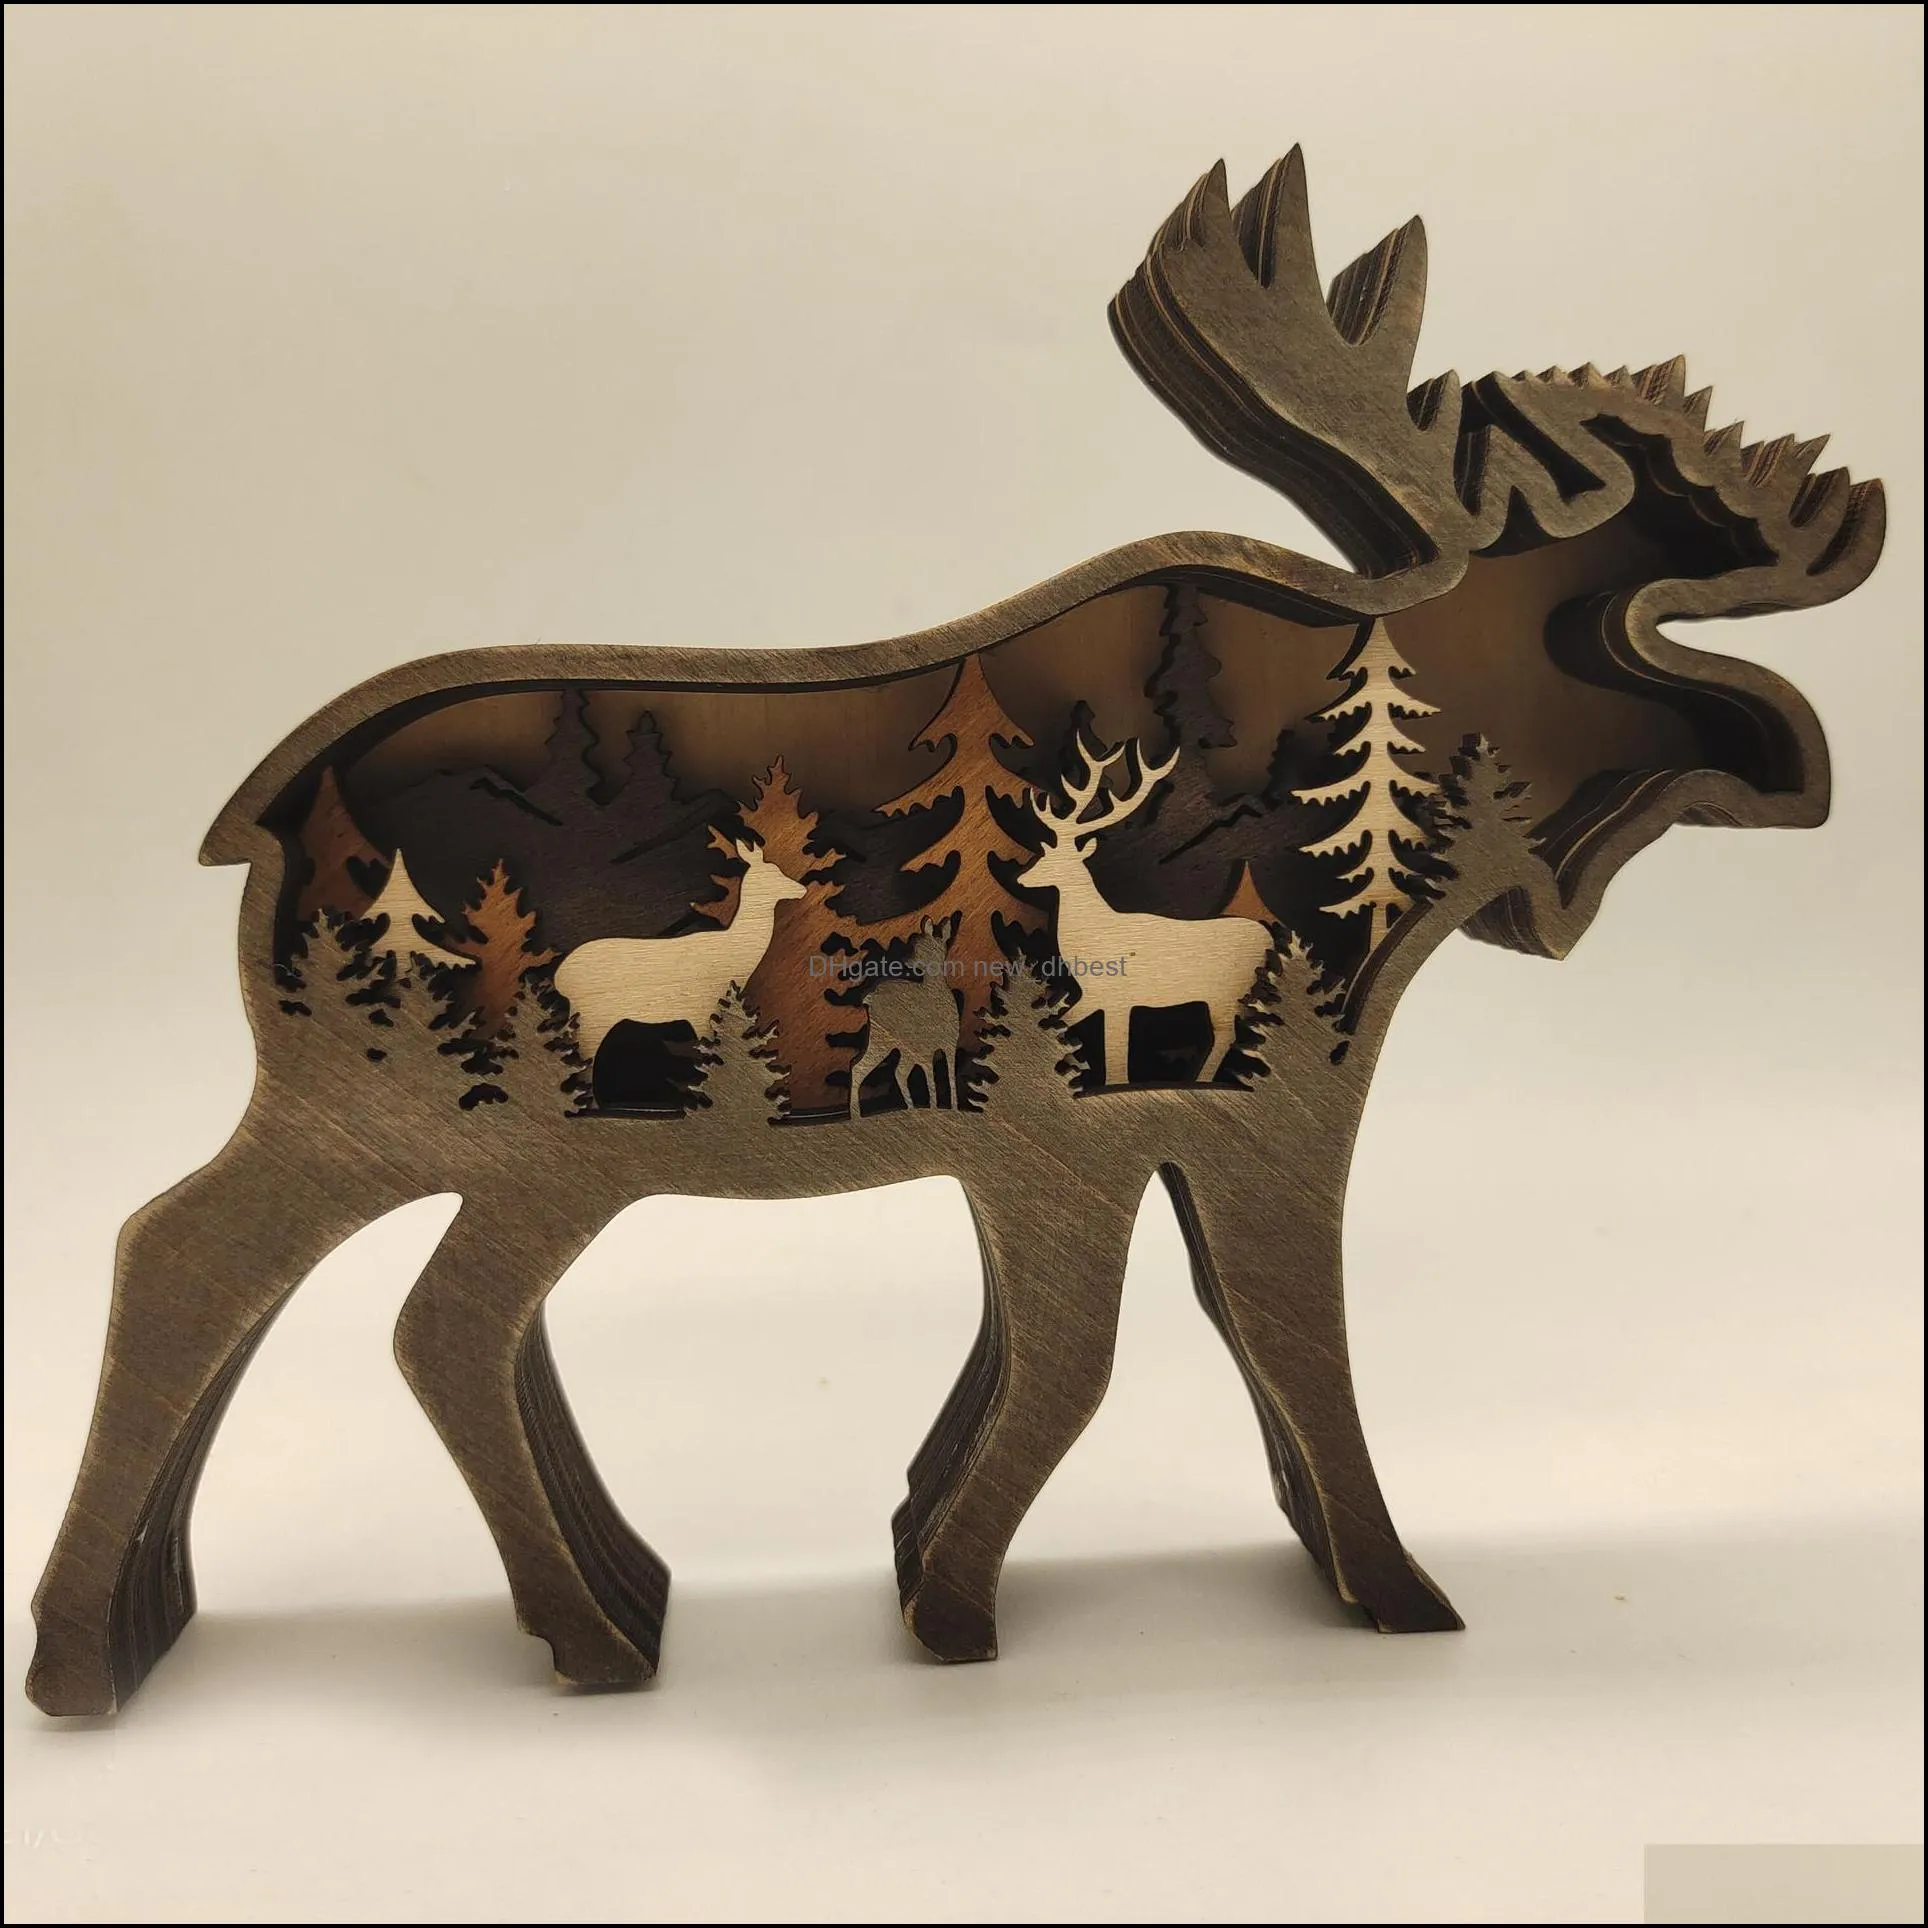 wild bear christams deer craft 3d laser cut wood material home decor gift art crafts forest animal table decoration bear statues ornaments room